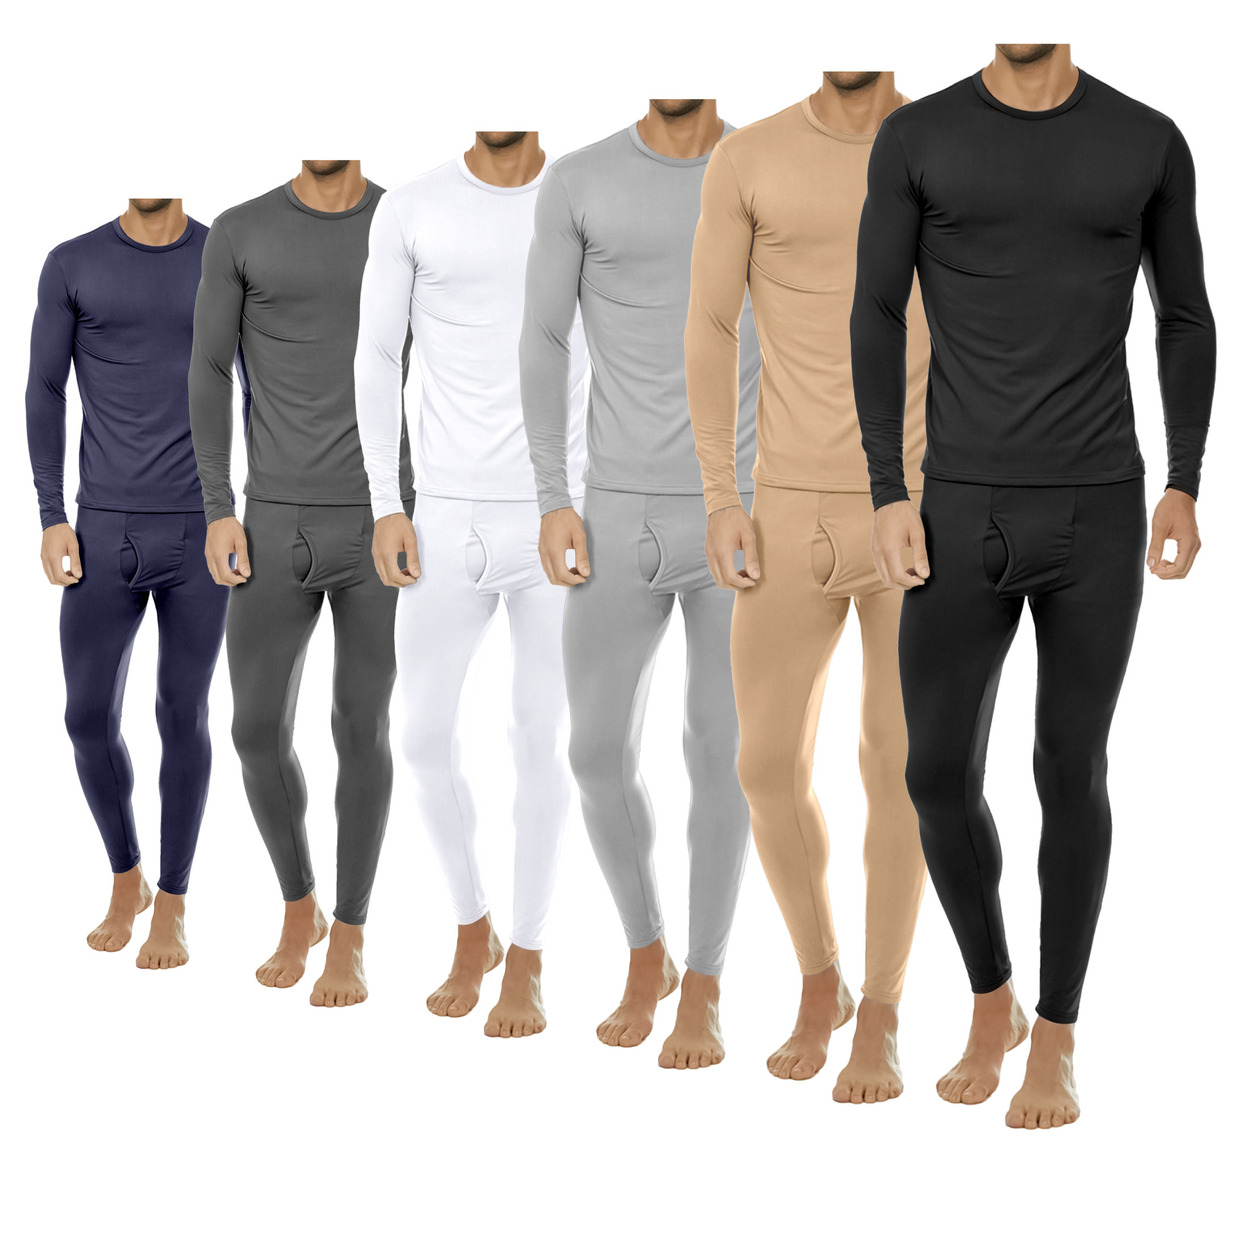 2-Sets: Men's Winter Warm Fleece Lined Thermal Underwear Set For Cold Weather - Grey&grey, X-large